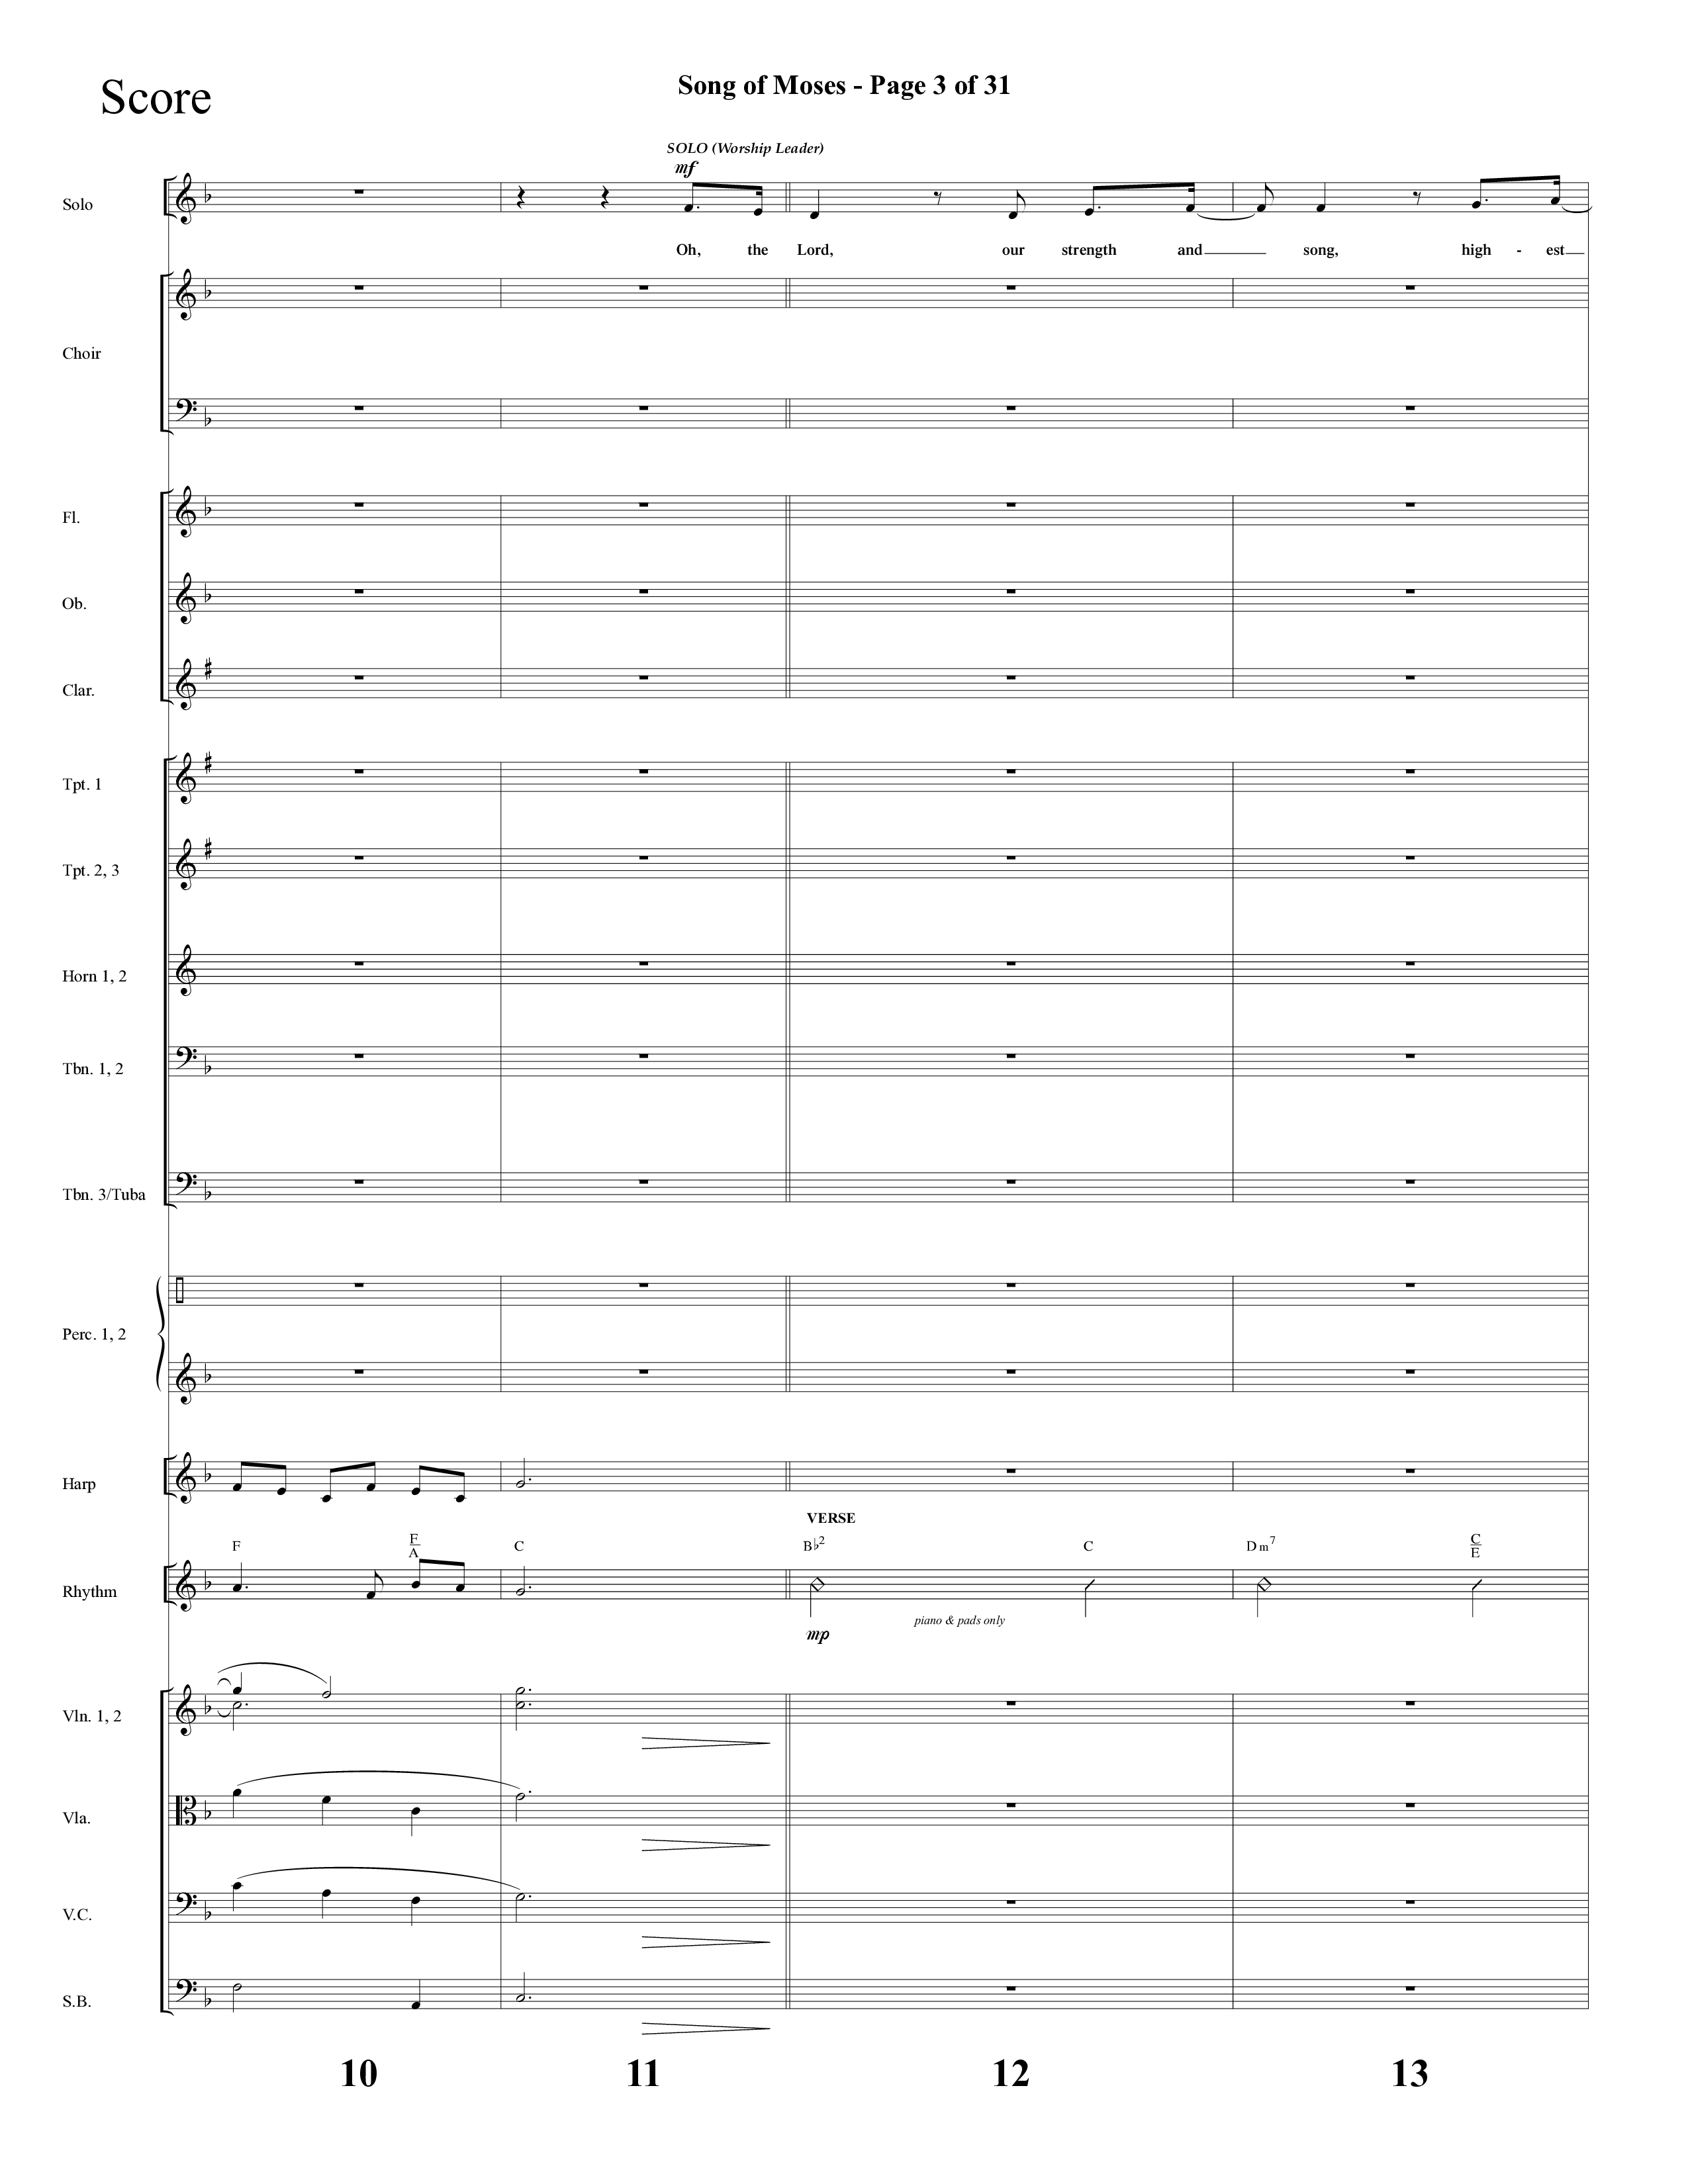 Song Of Moses (Choral Anthem SATB) Conductor's Score (Lifeway Choral / Arr. Cliff Duren)